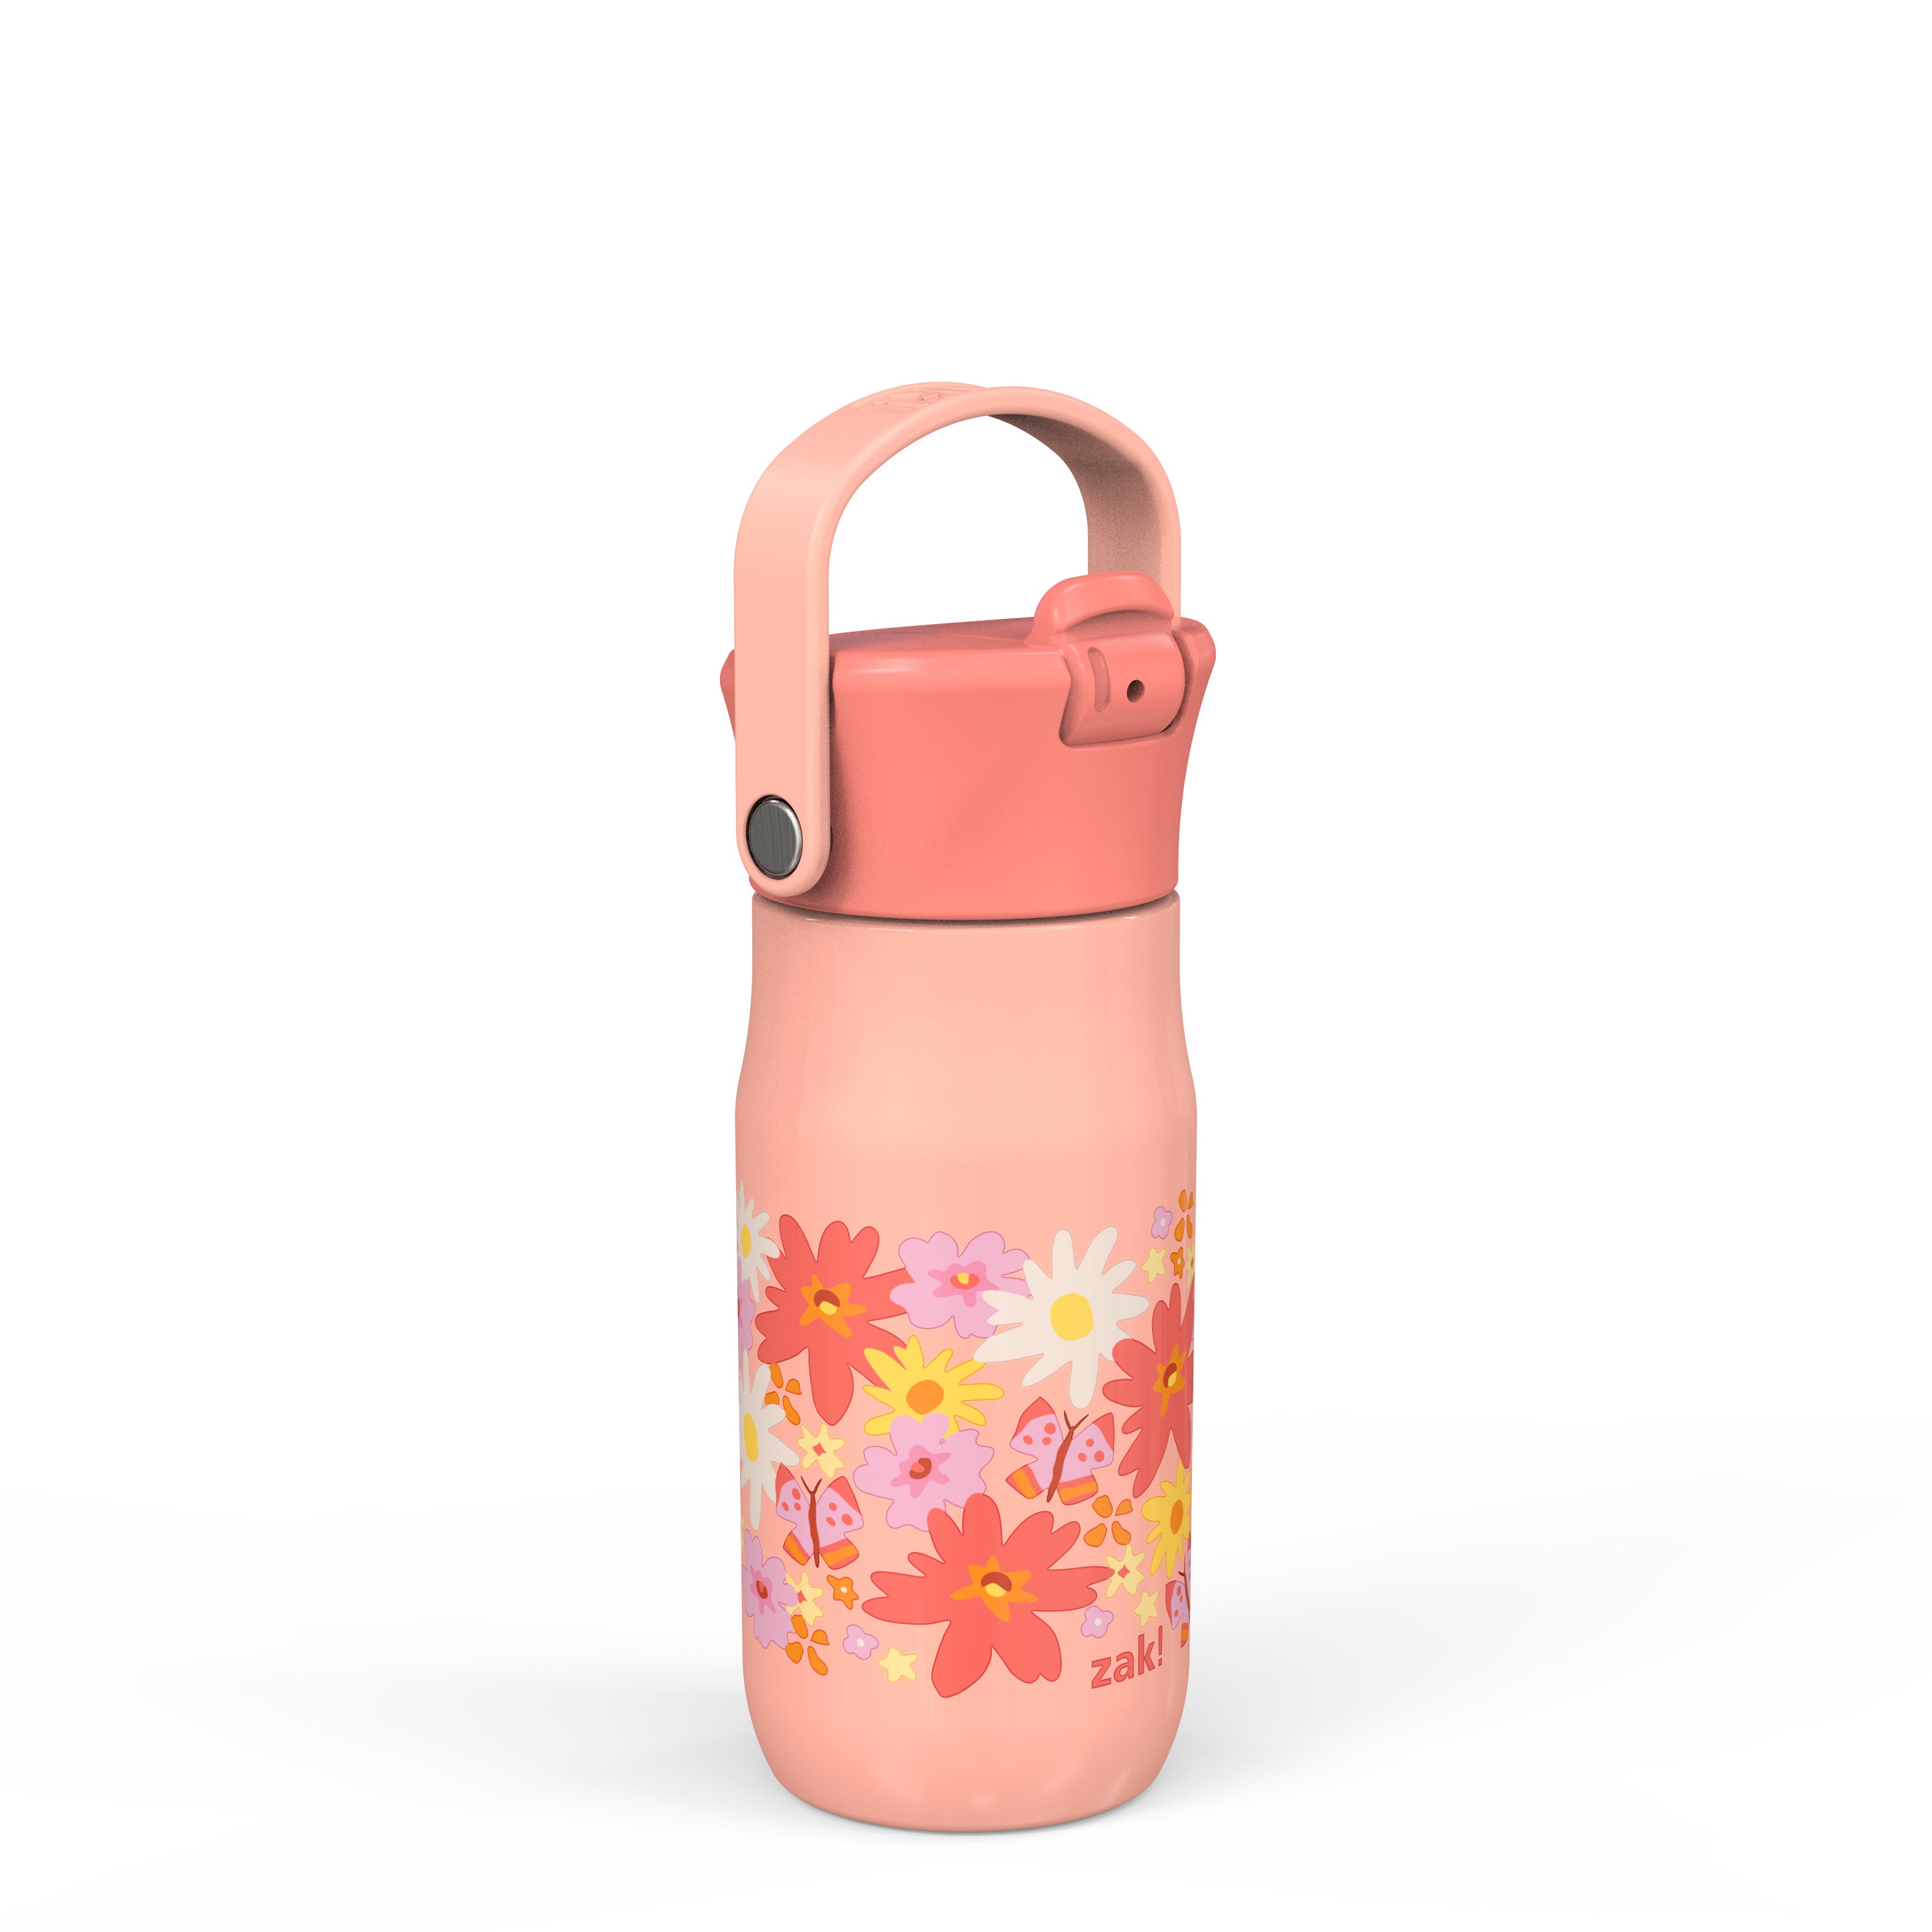 Flower Power Harmony Recycled Stainless Steel Kids Water Bottle with Straw Spout, 14 ounces